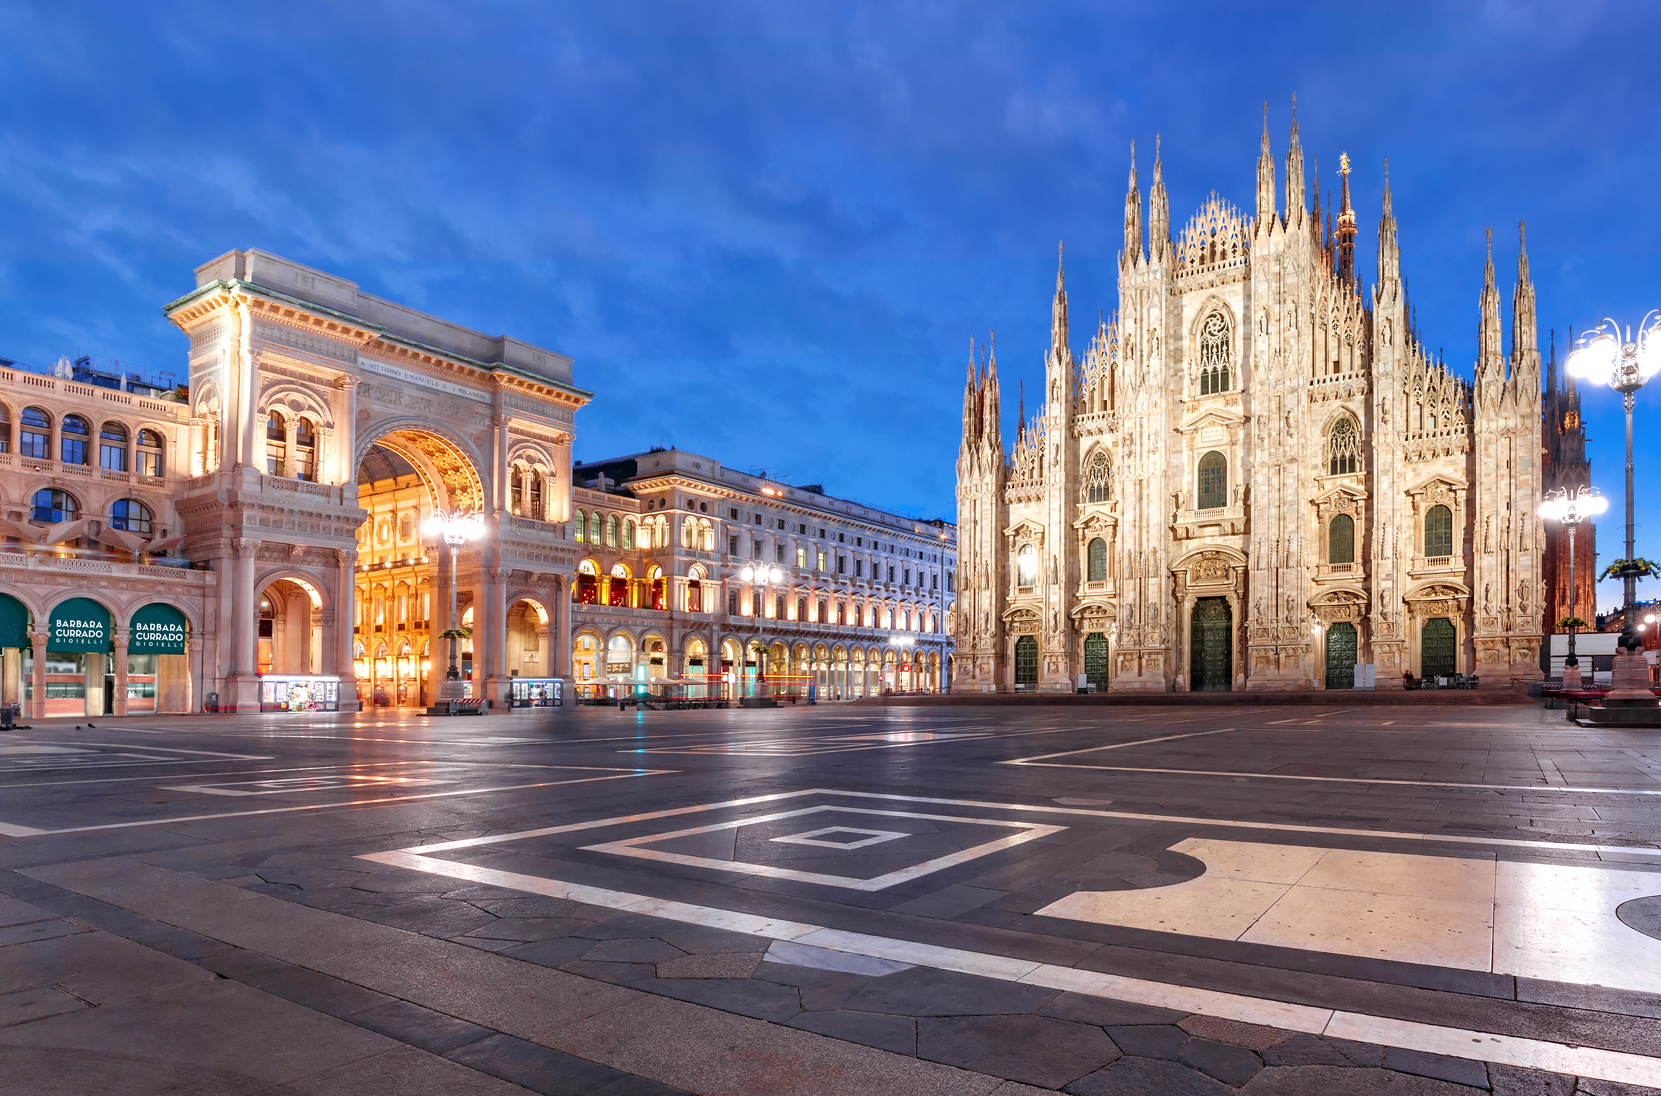 Panorama of the Piazza del Duomo, Cathedral Square, with Milan Cathedral or Duomo di Milano and Galleria Vittorio Emanuele II, during morning blue hour, Milan, Lombardia, Italy